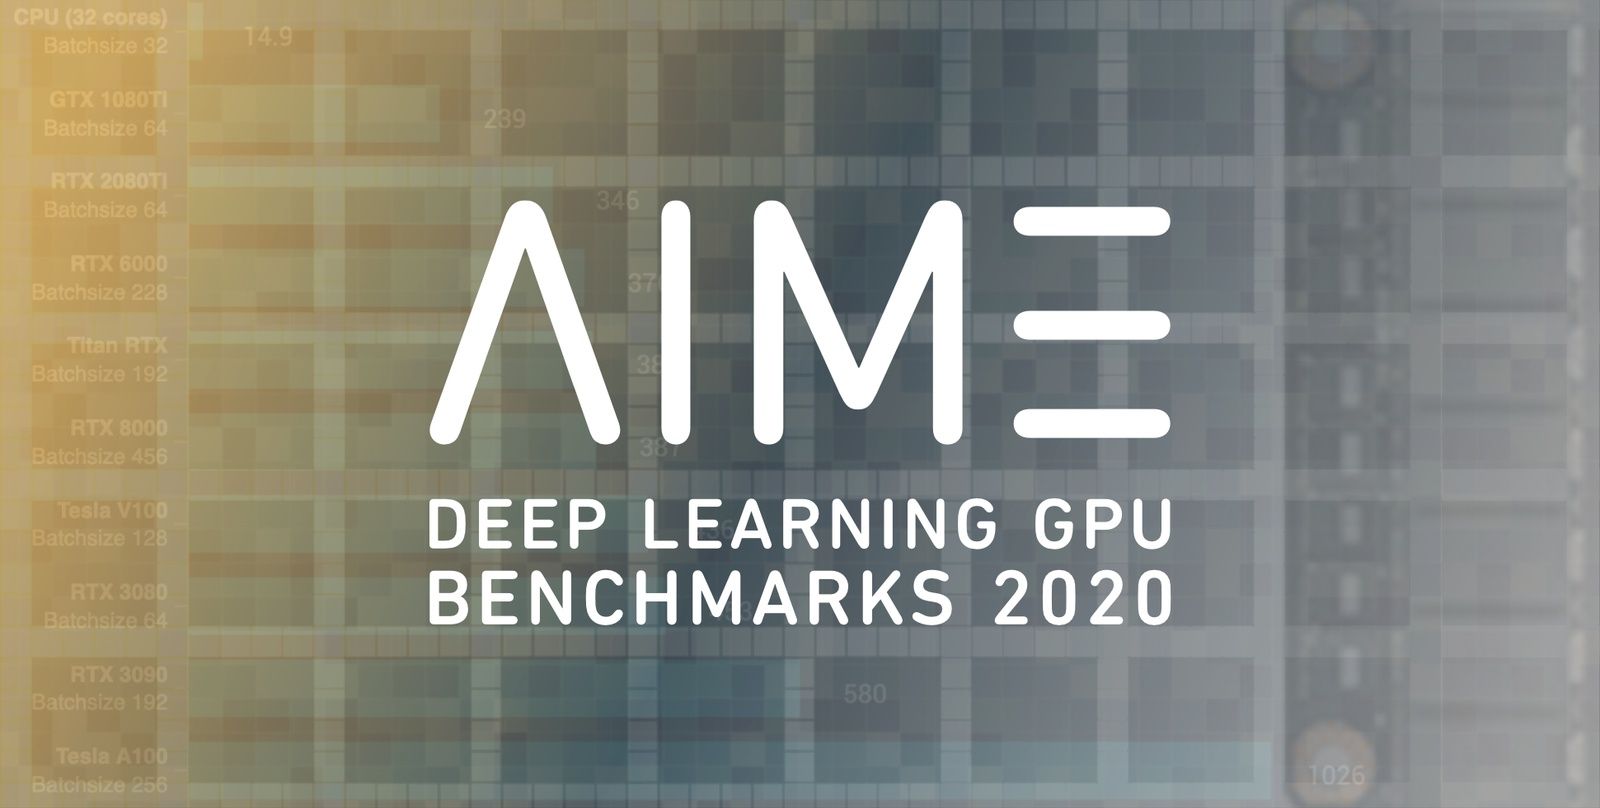 All You Need Is One GPU: Inference Benchmark for Stable Diffusion